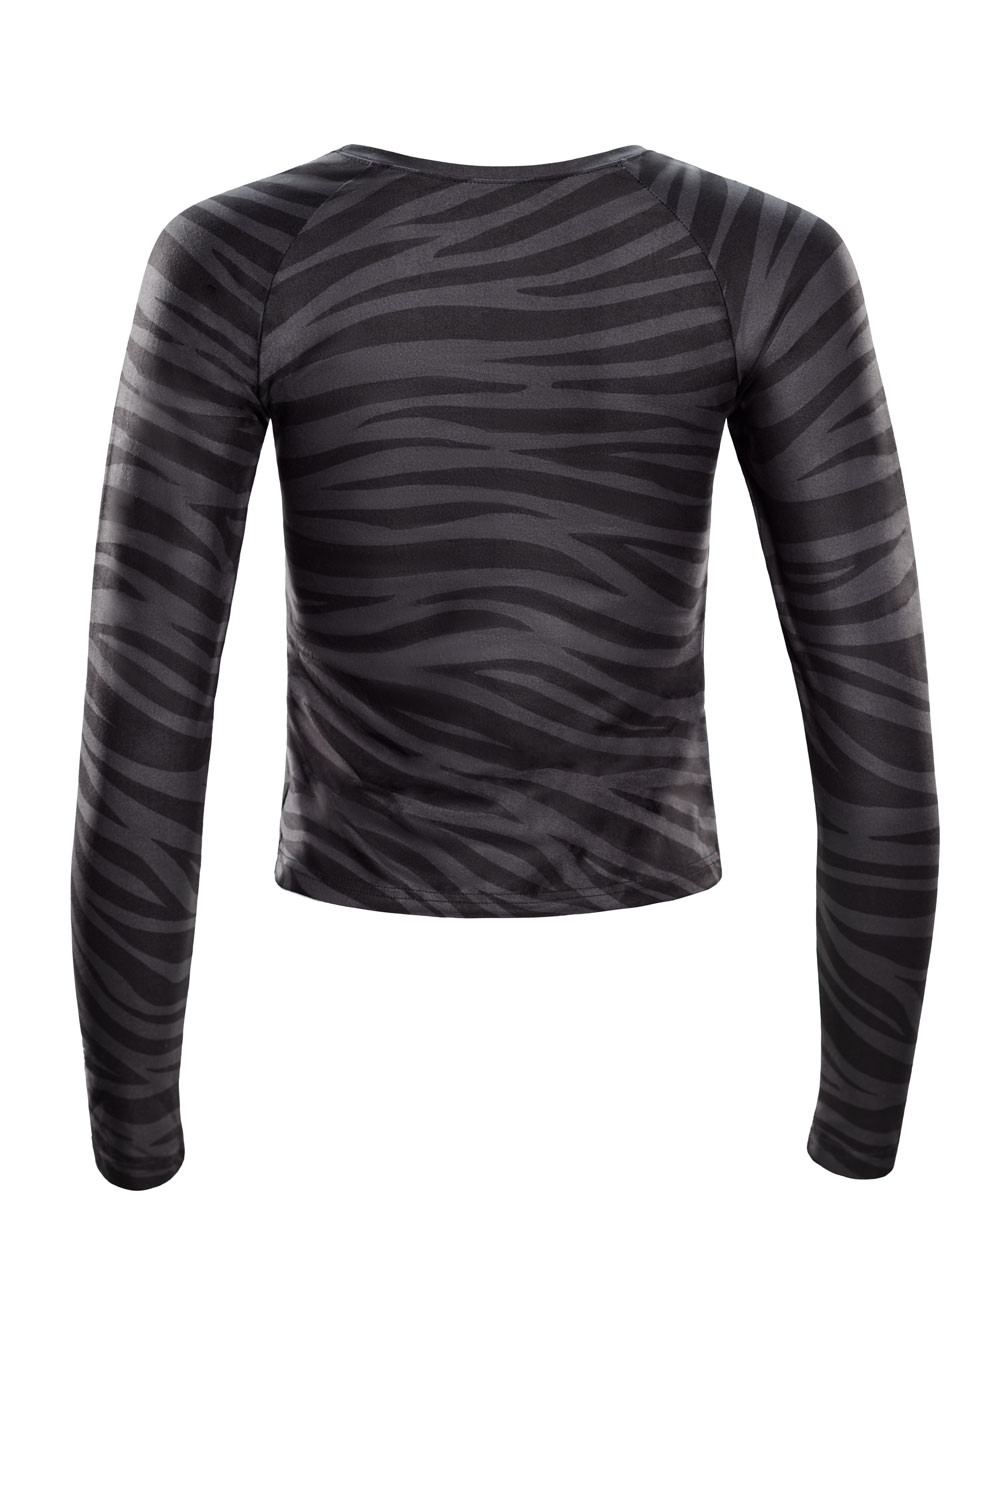 Functional Light and Soft Cropped Long Sleeve Top AET119LS, Zebra, Winshape  Ultra Soft Style